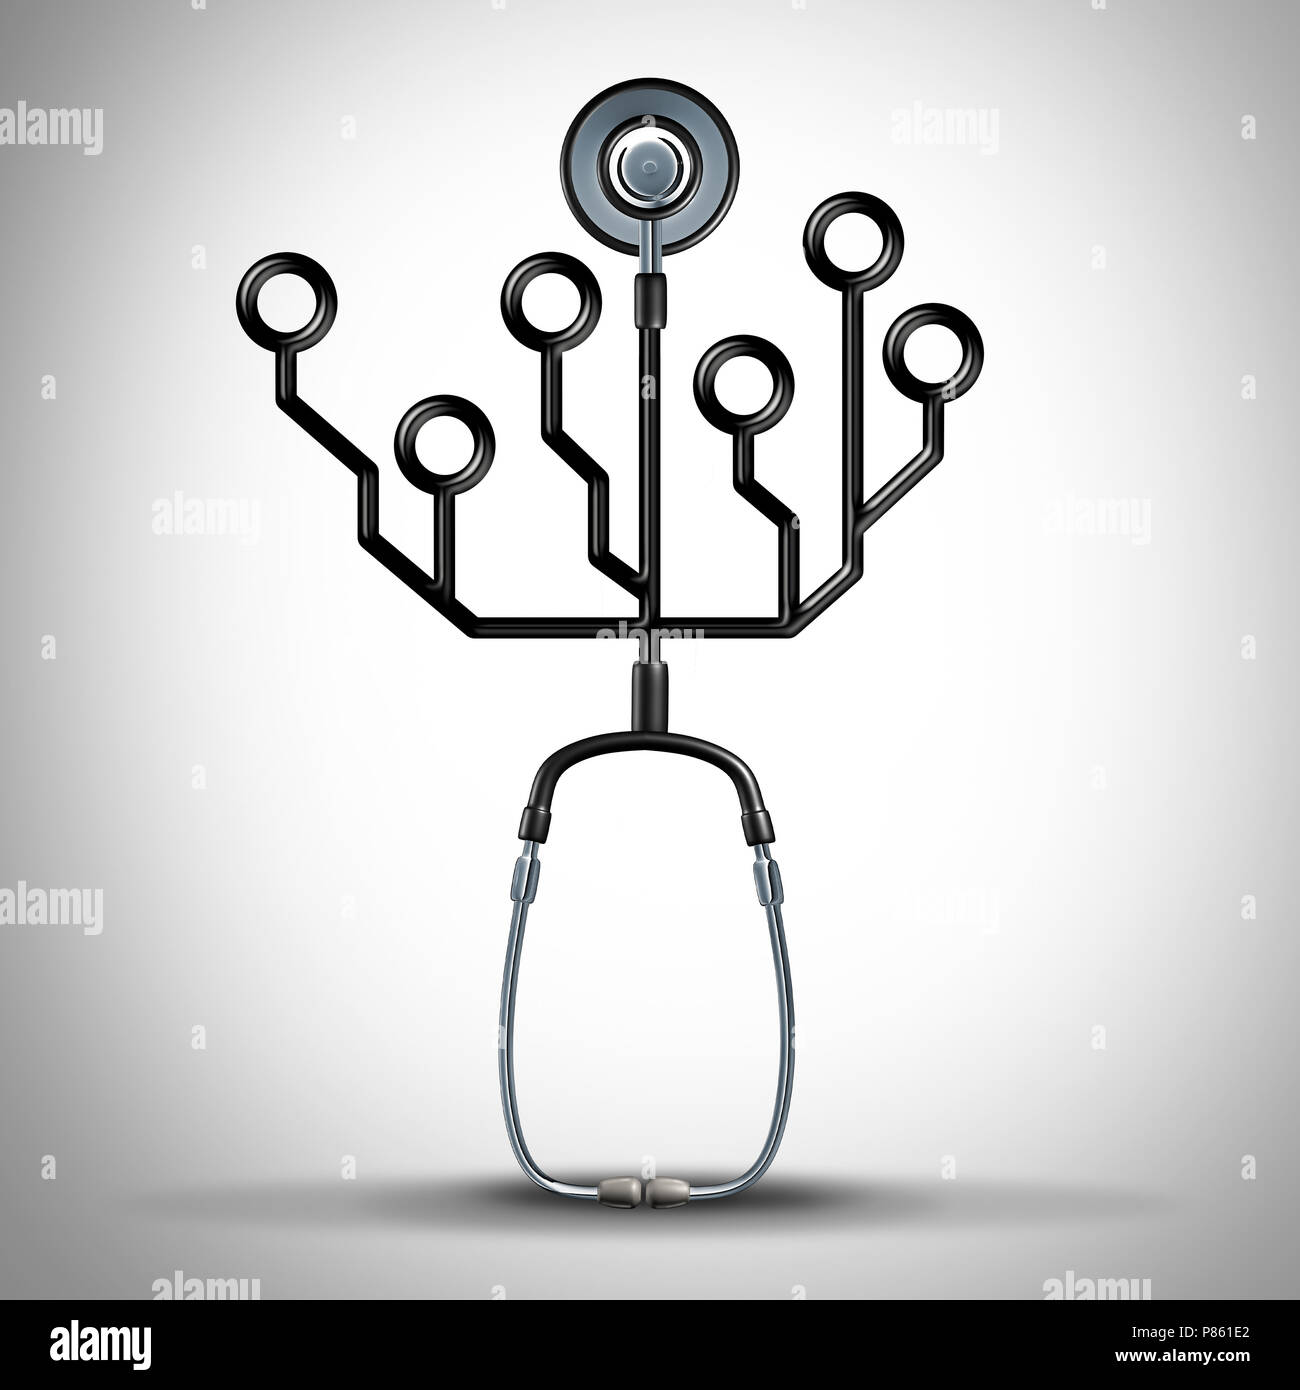 Medicine technology and digital health or medical data concept as a doctor stethoscope shaped as an electronic circuit as a 3D illustration. Stock Photo